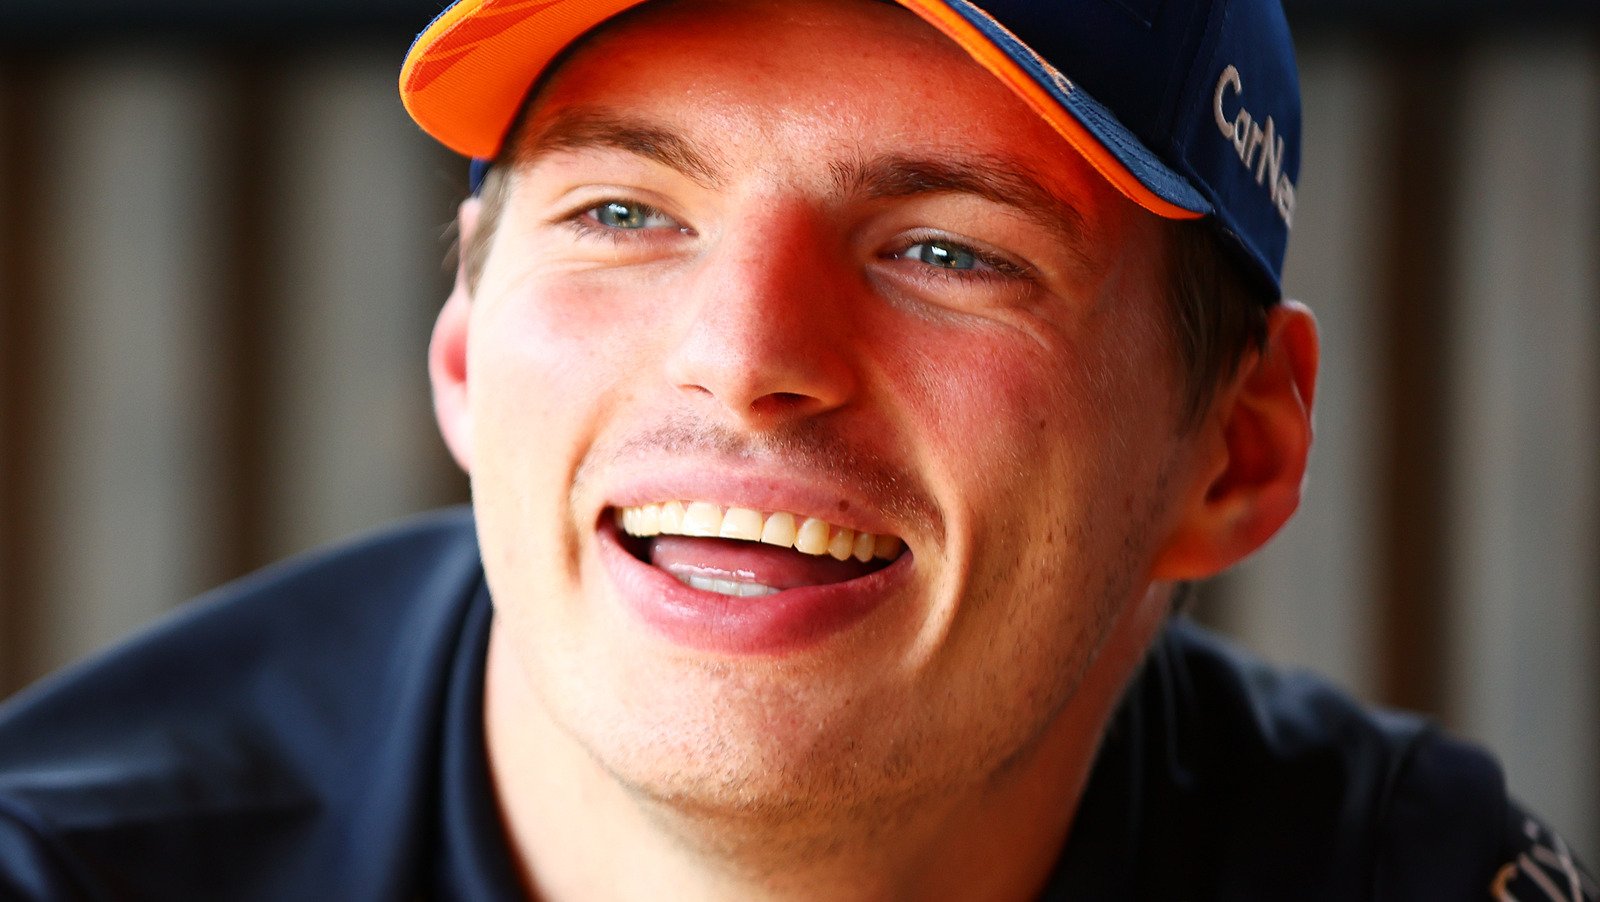 The Most Incredible Features Of Max Verstappen's Luxurious $15 Million Private Jet